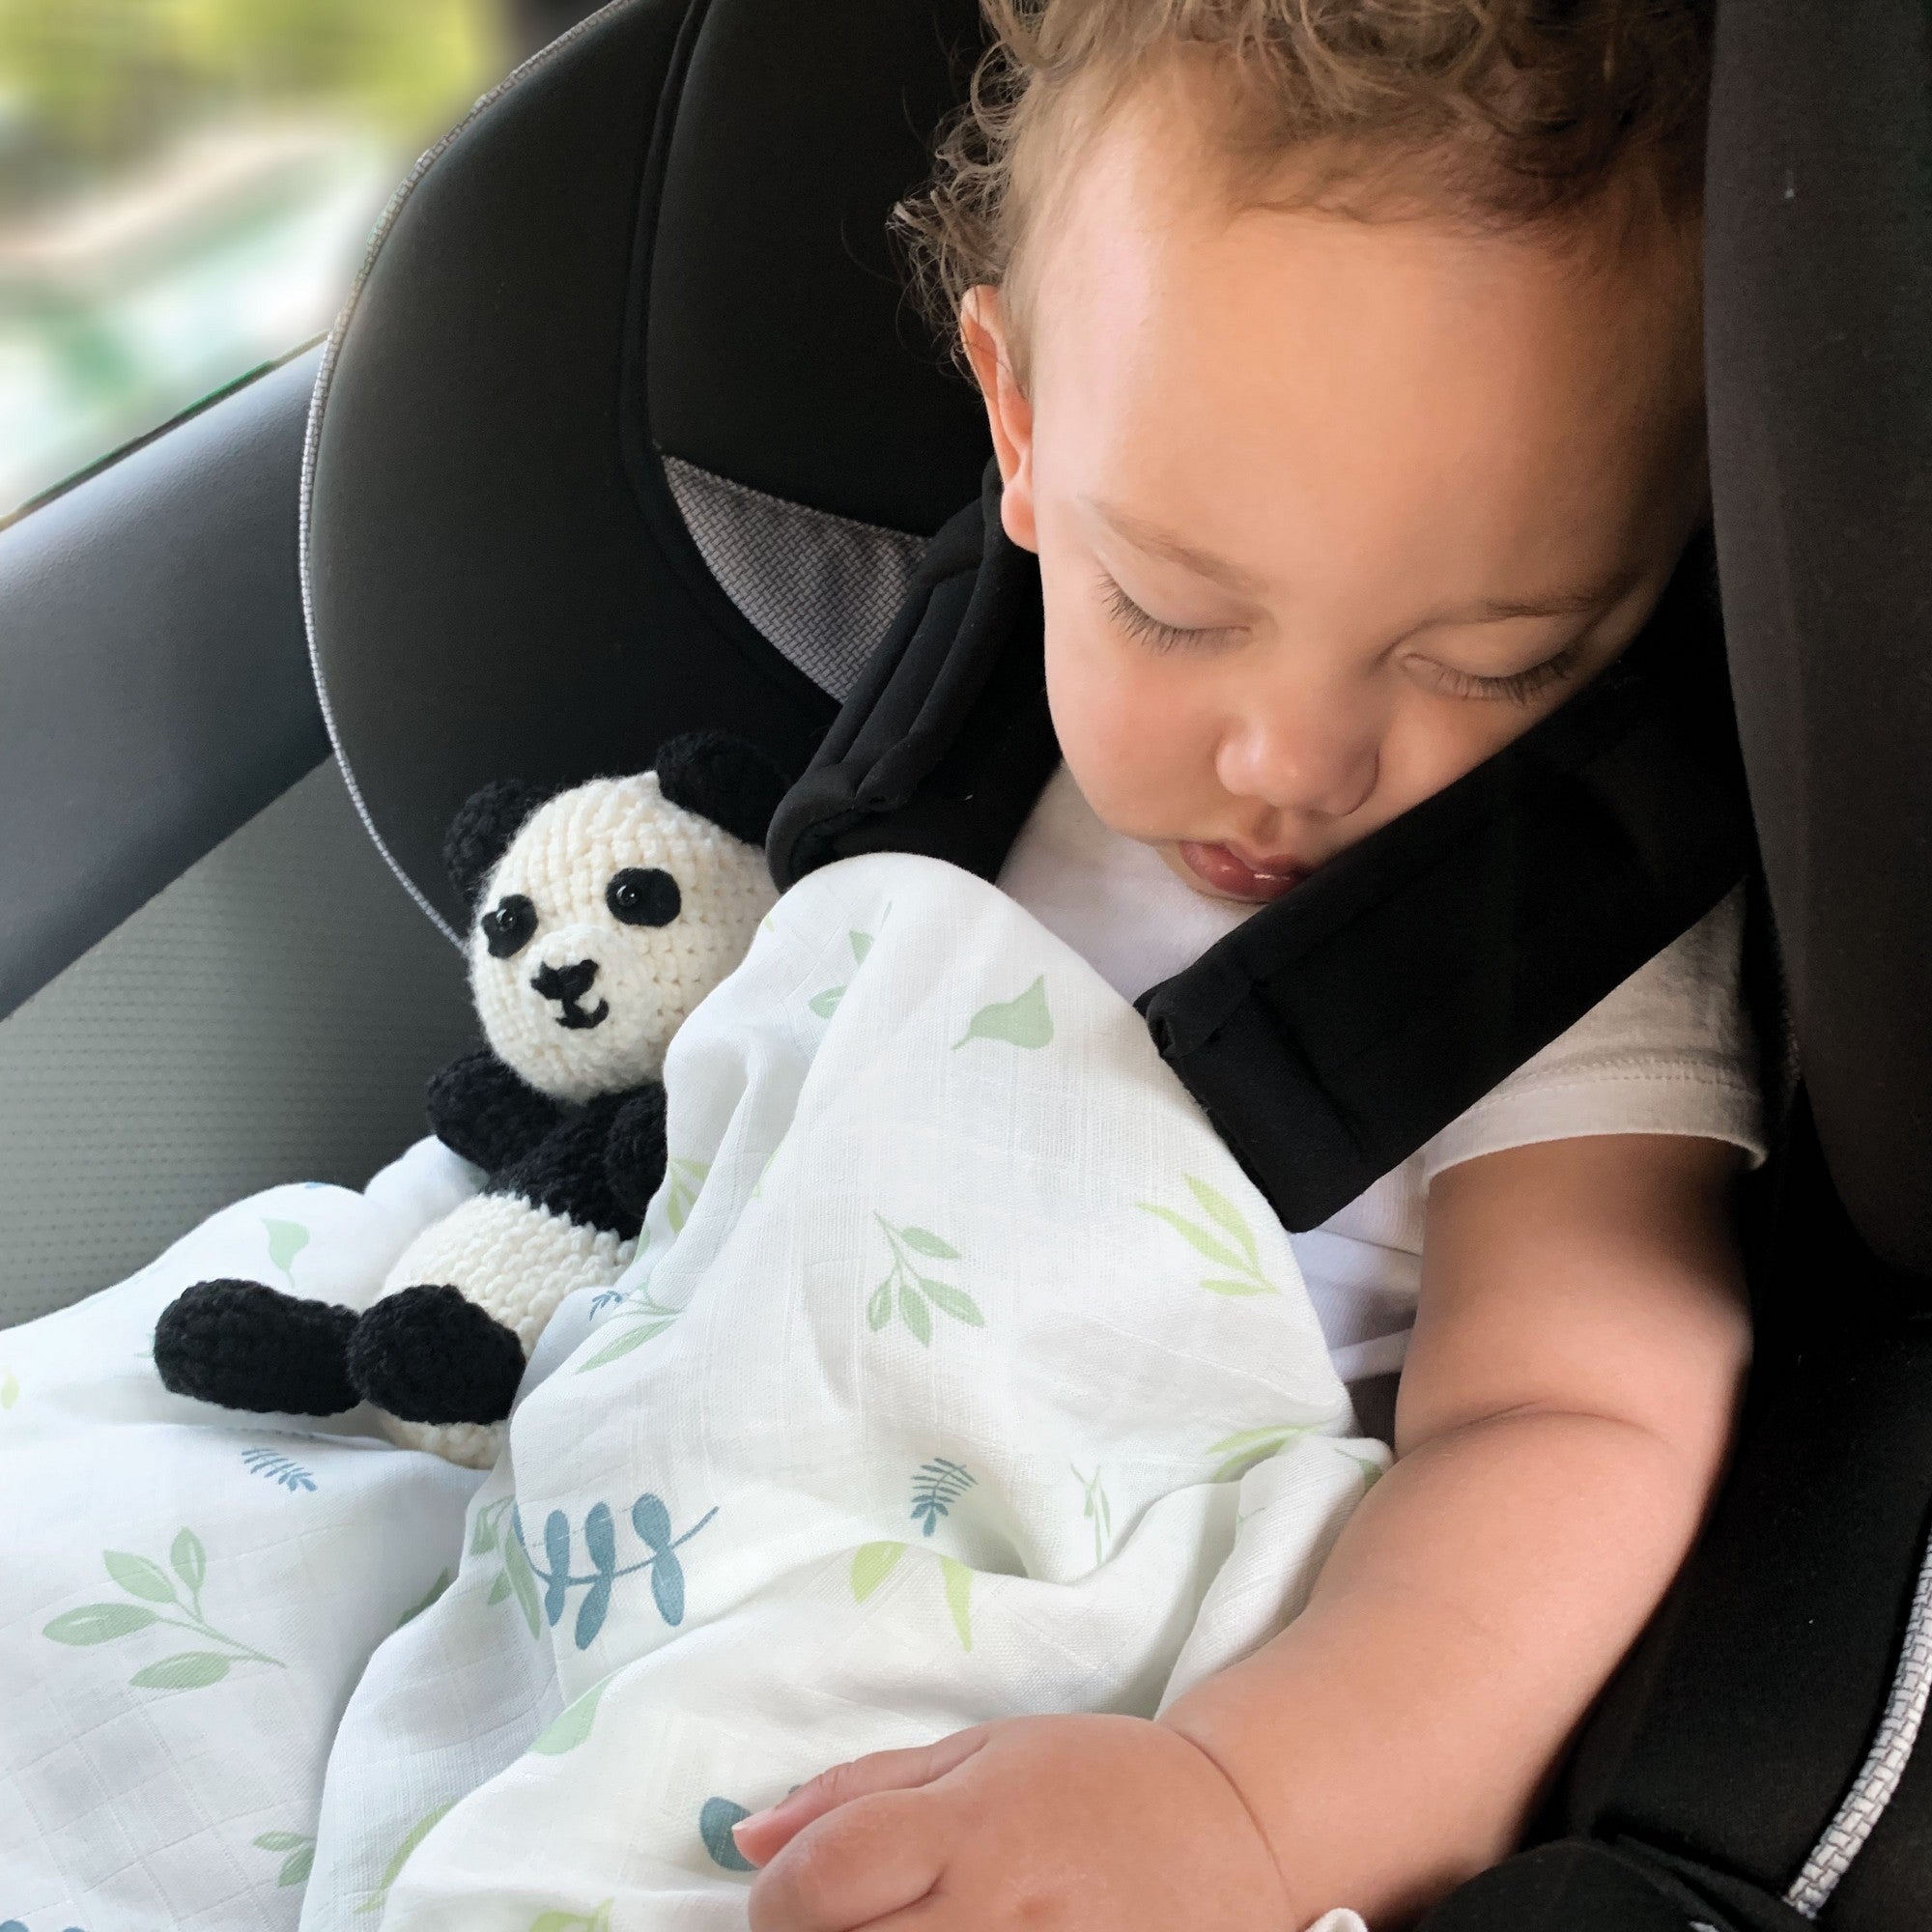 baby boy in car seat sleeping holding a panda doll and a bamboo leaf printed swaddle blanket